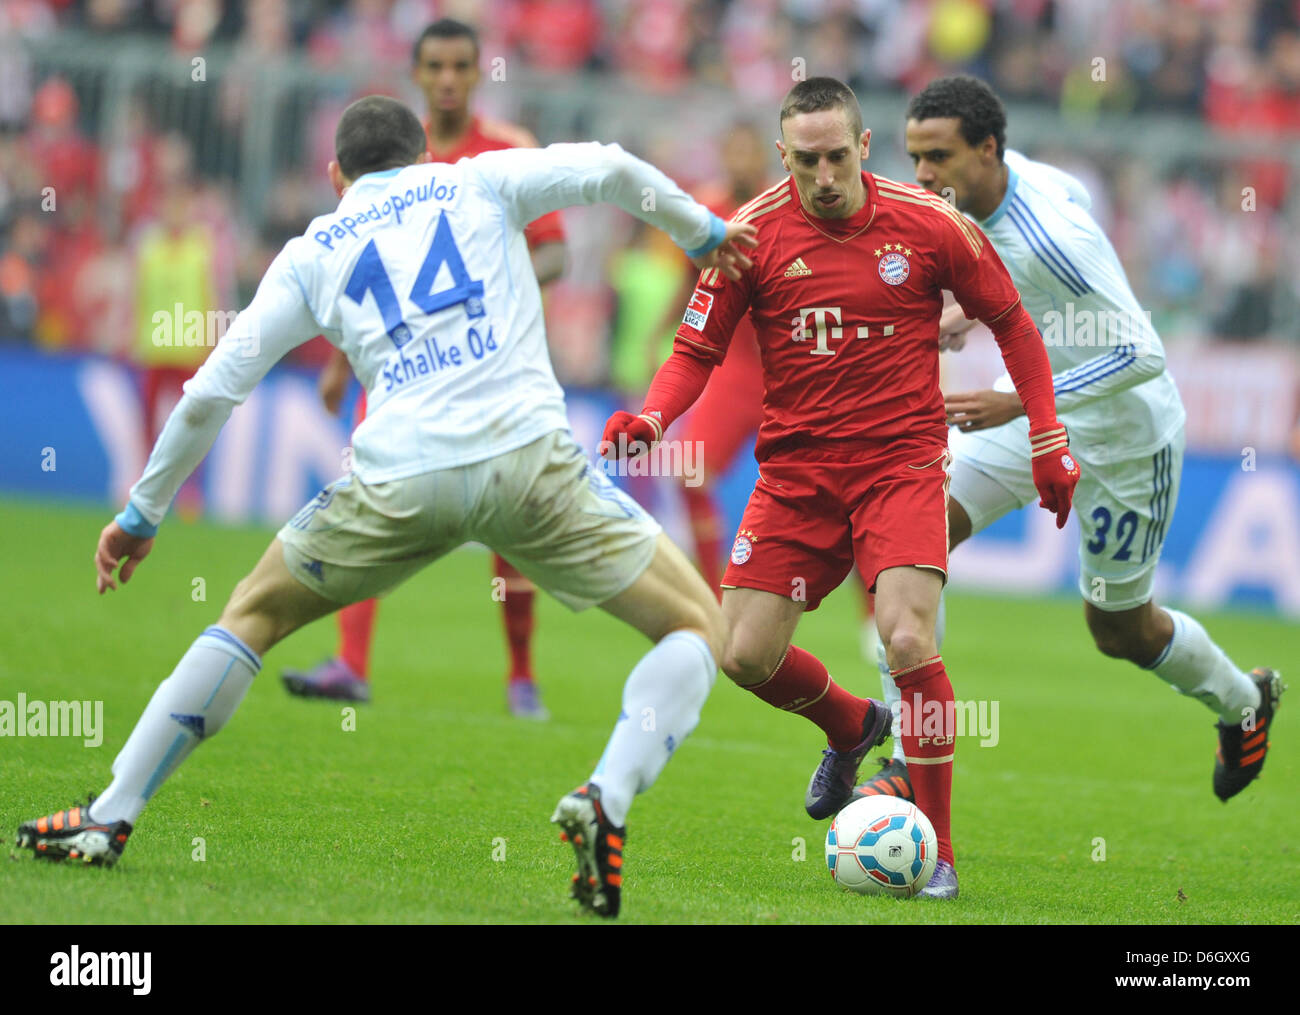 Munich's Franck Ribery (C) vies for the ball with Schalke's Kyriakos Papadopoulos (L) and Joel Matip during the Bundesliga soccer match between FC Bayern Munich and FC Schalke 04 at Allianz-Arena in Munich, Germany, 26 February 2012. Photo: PETER KNEFFEL  (ATTENTION: EMBARGO CONDITIONS! The DFL permits the further utilisation of the pictures in IPTV, mobile services and other new t Stock Photo